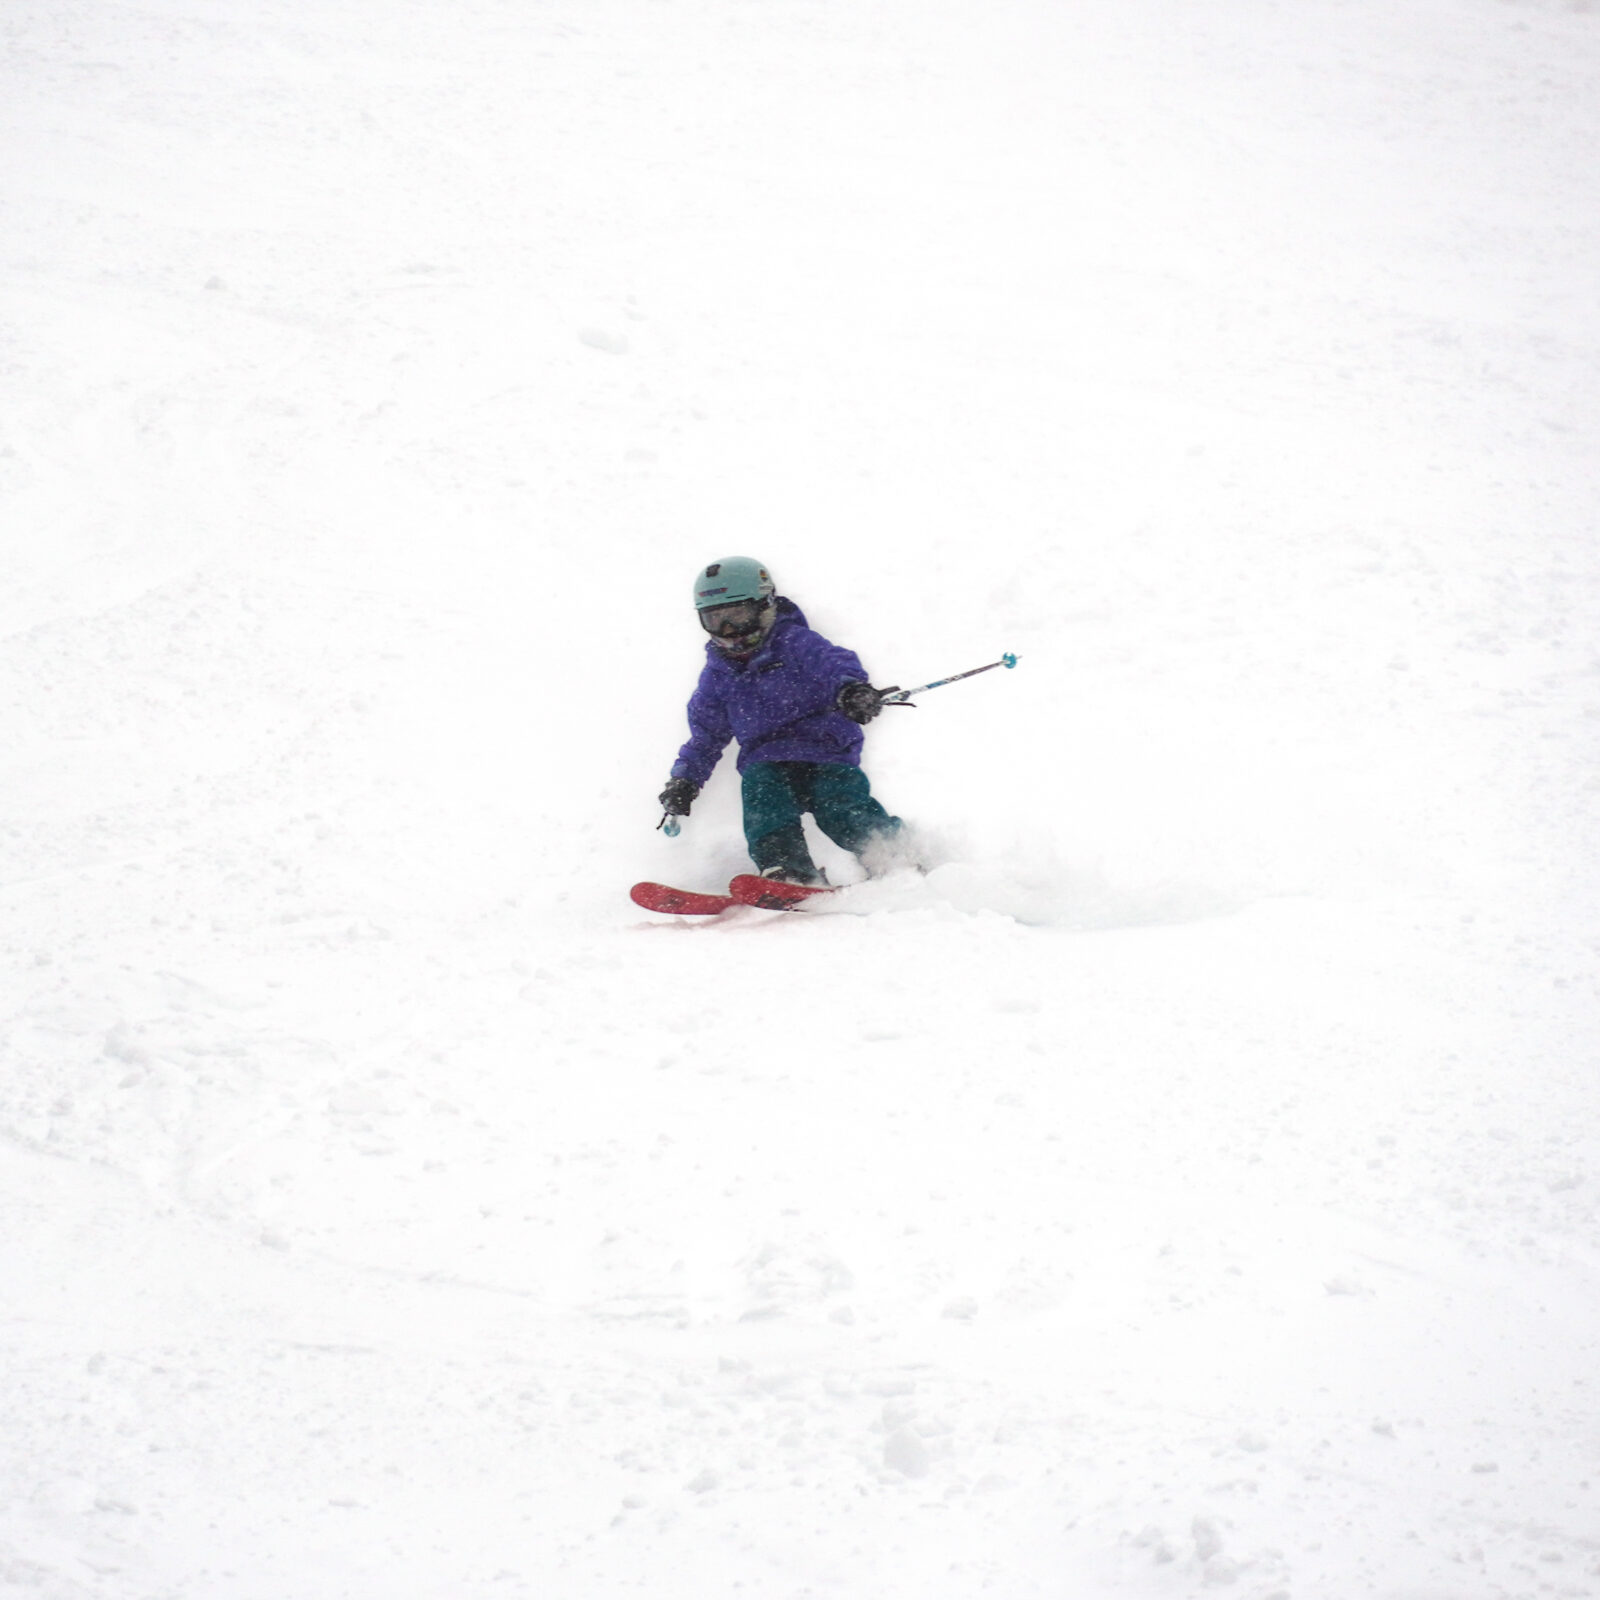 Young skier in blue making a turn on a stormy day.